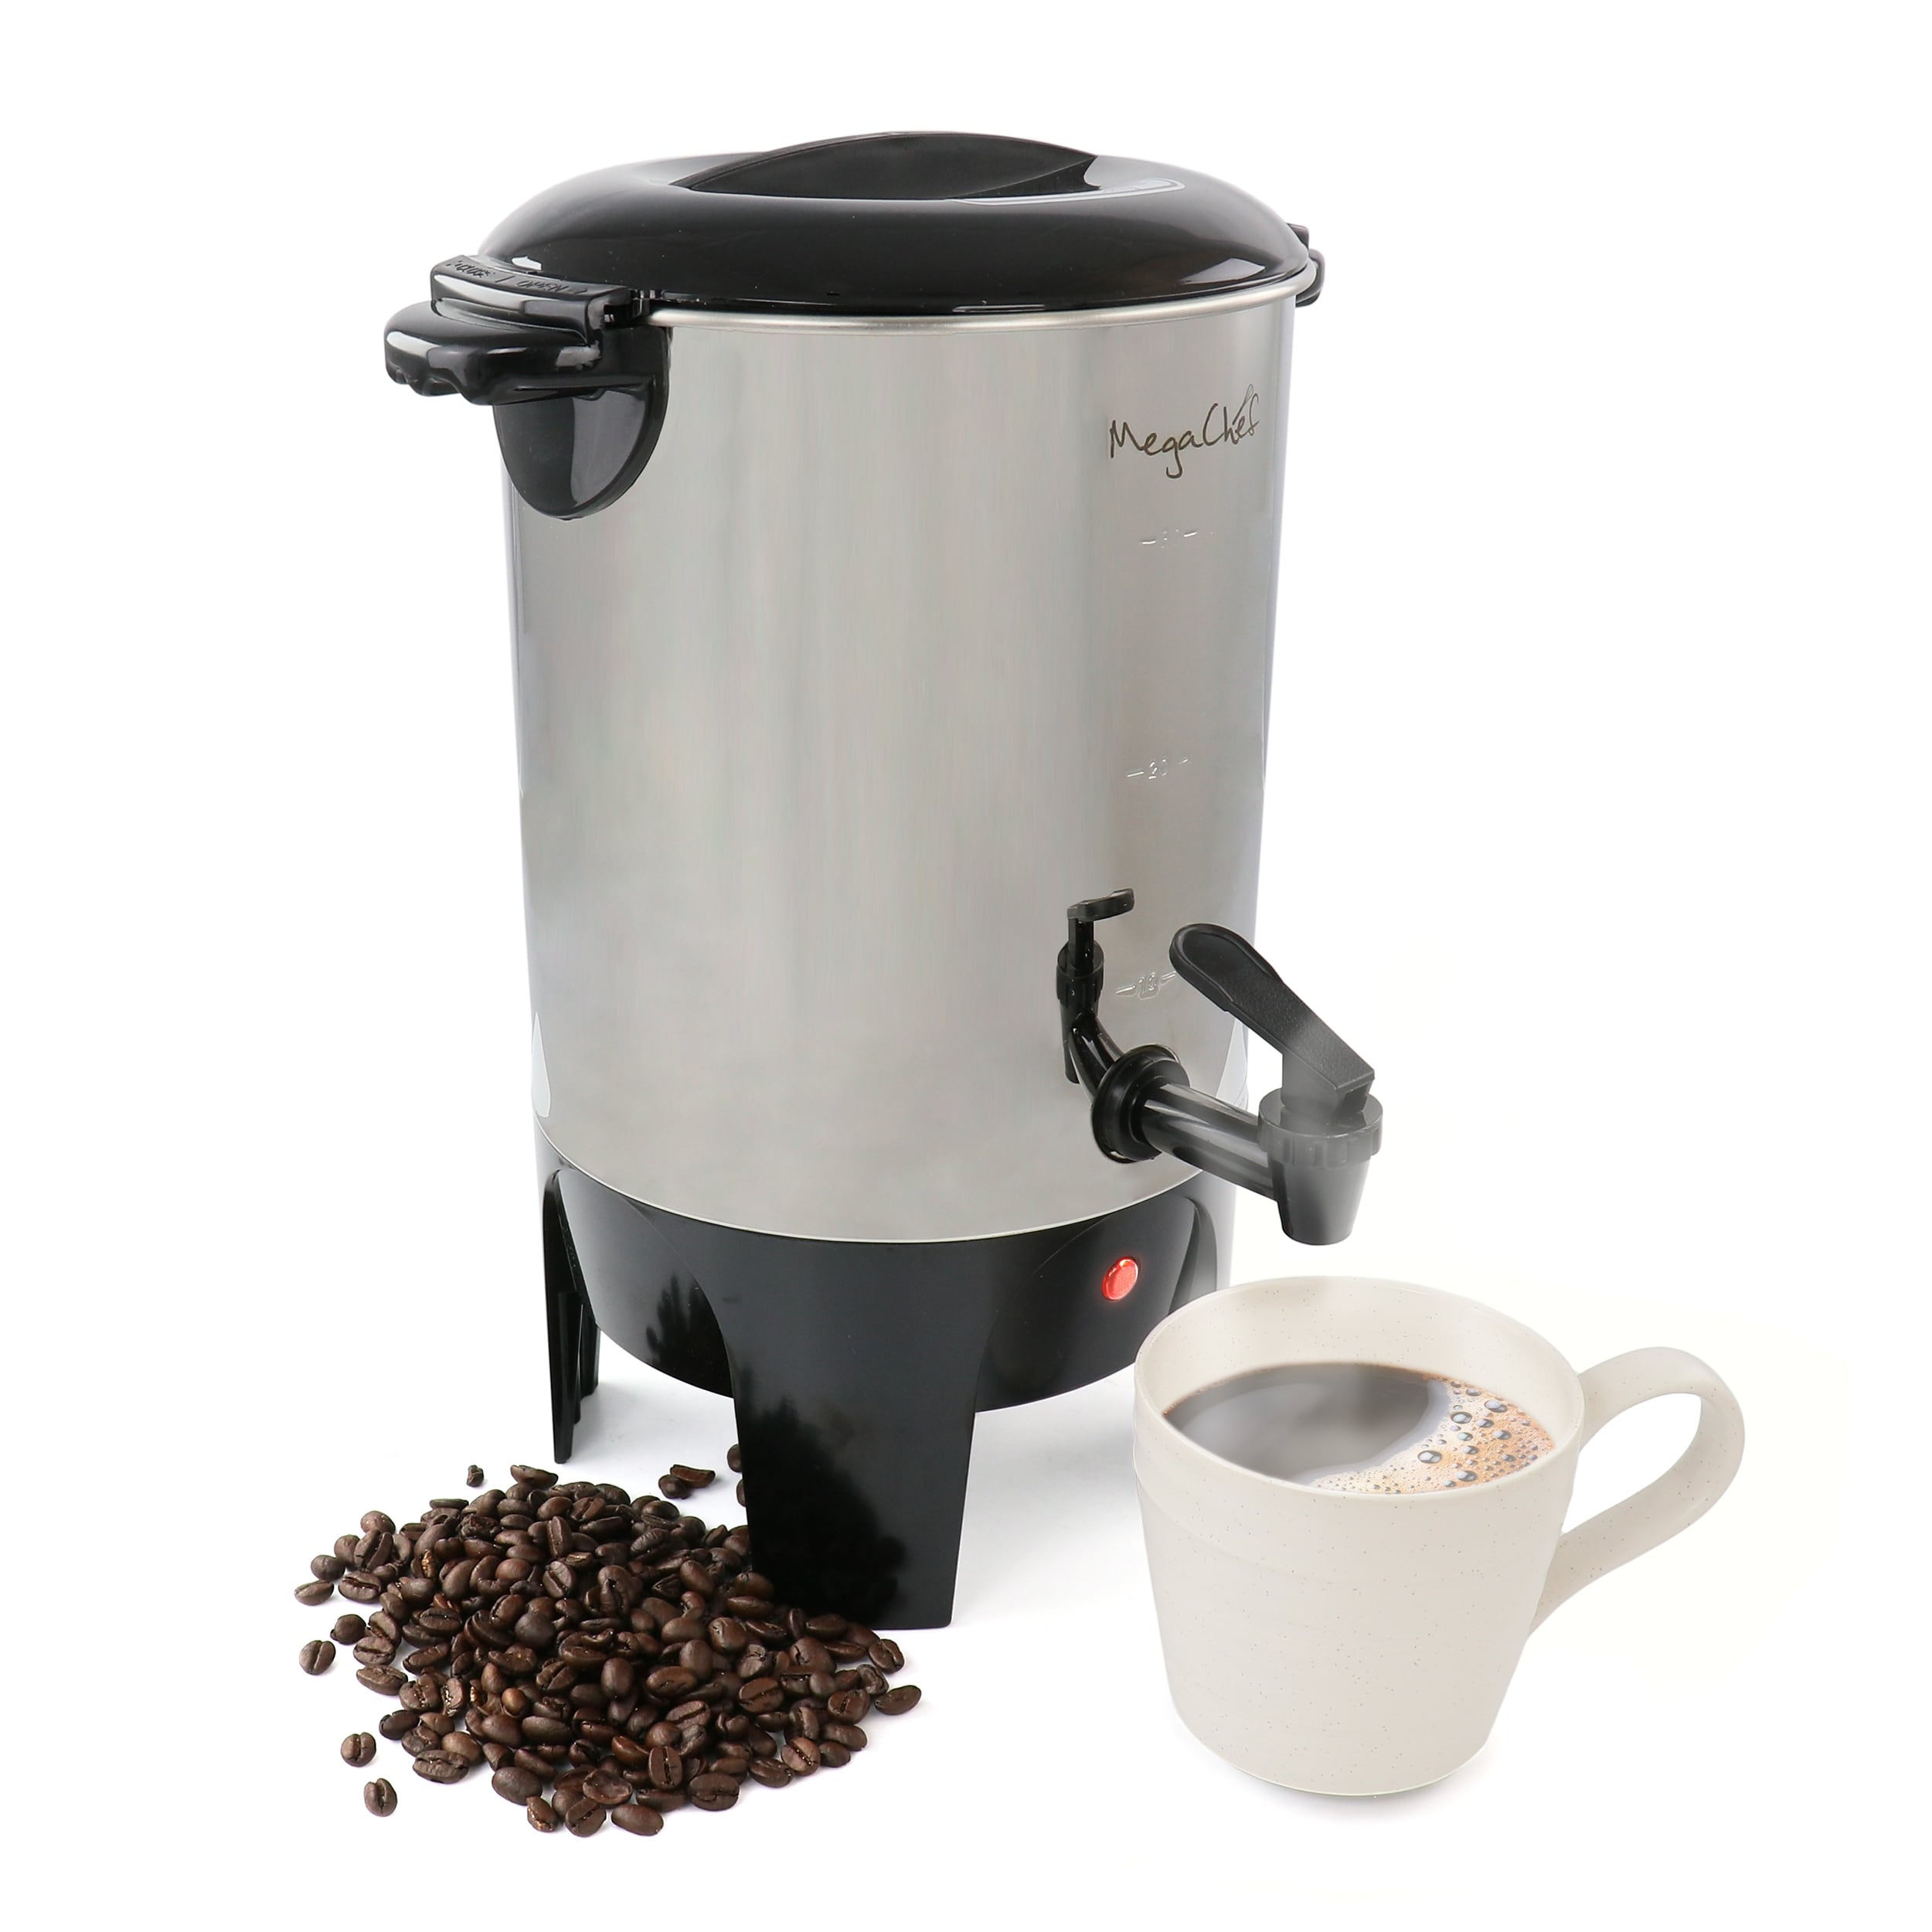 https://ak1.ostkcdn.com/images/products/is/images/direct/dc1652c5a5c8f8079fab9c095968b953d1a64f9b/30-Cup-Stainless-Steel-Coffee-Urn.jpg